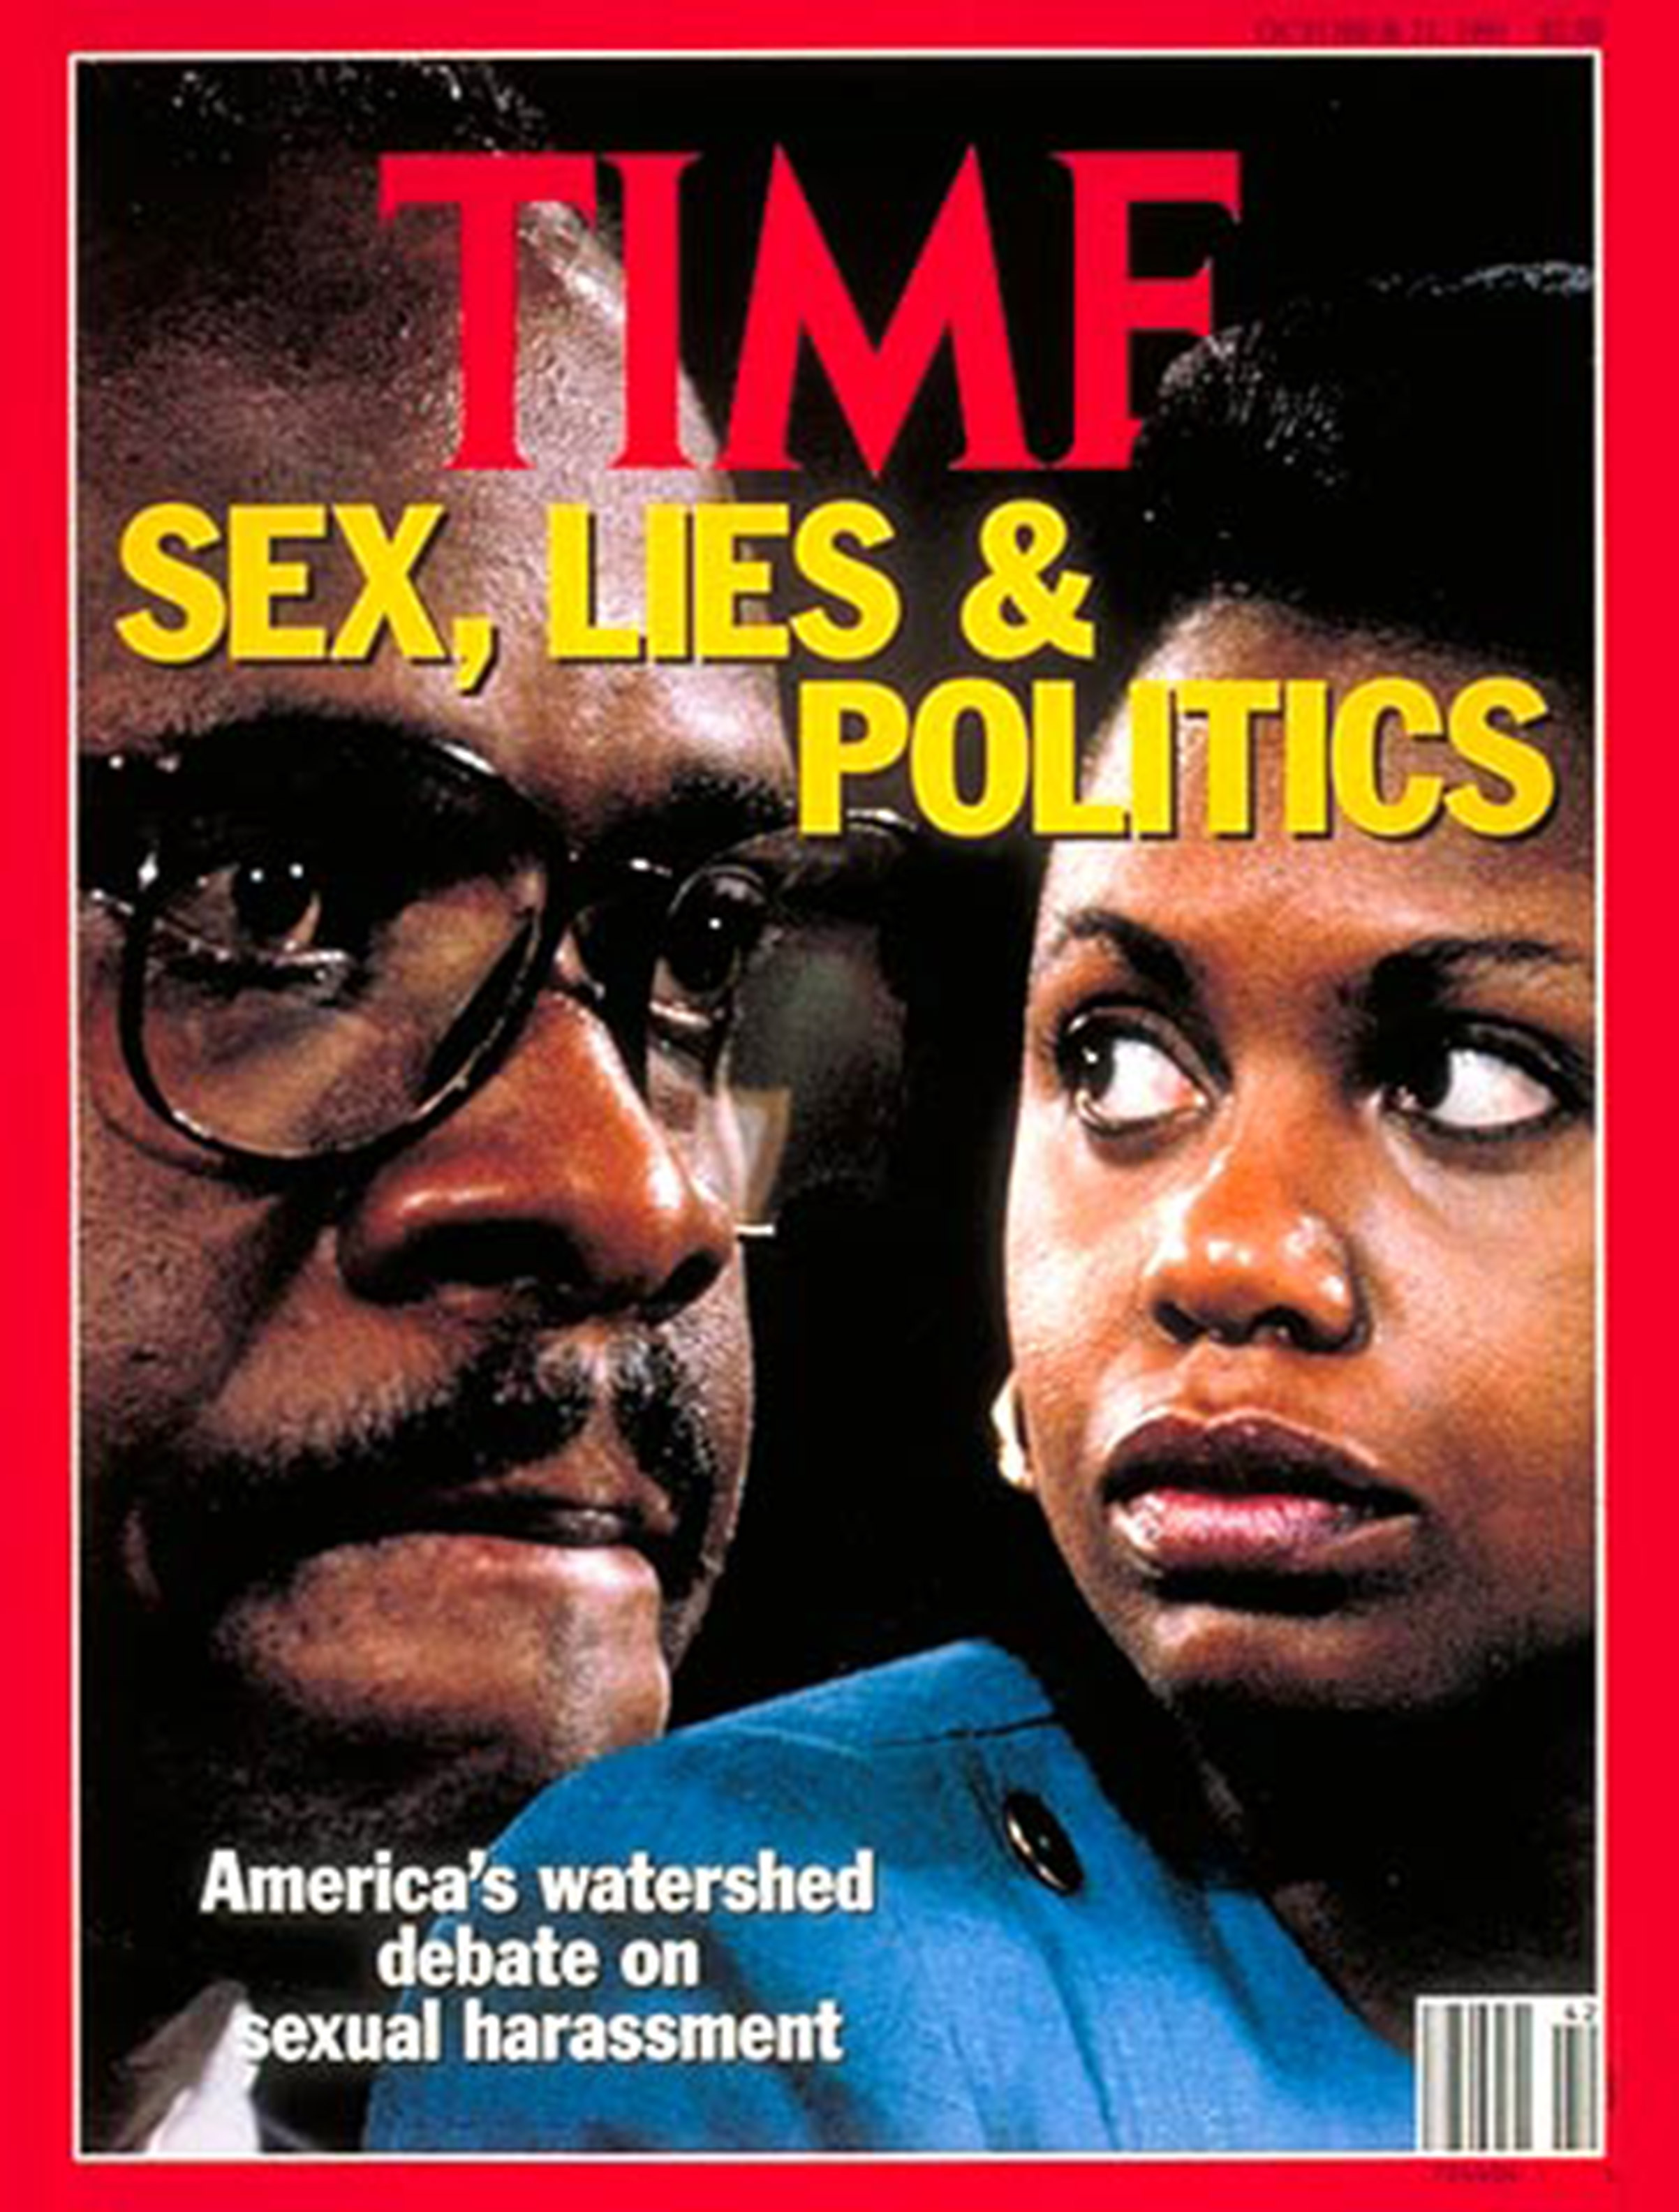 Supreme Court nominee Clarence Thomas and law professor Anita Hill on the Oct. 21, 1991, cover of TIME. (Dennis Brack)